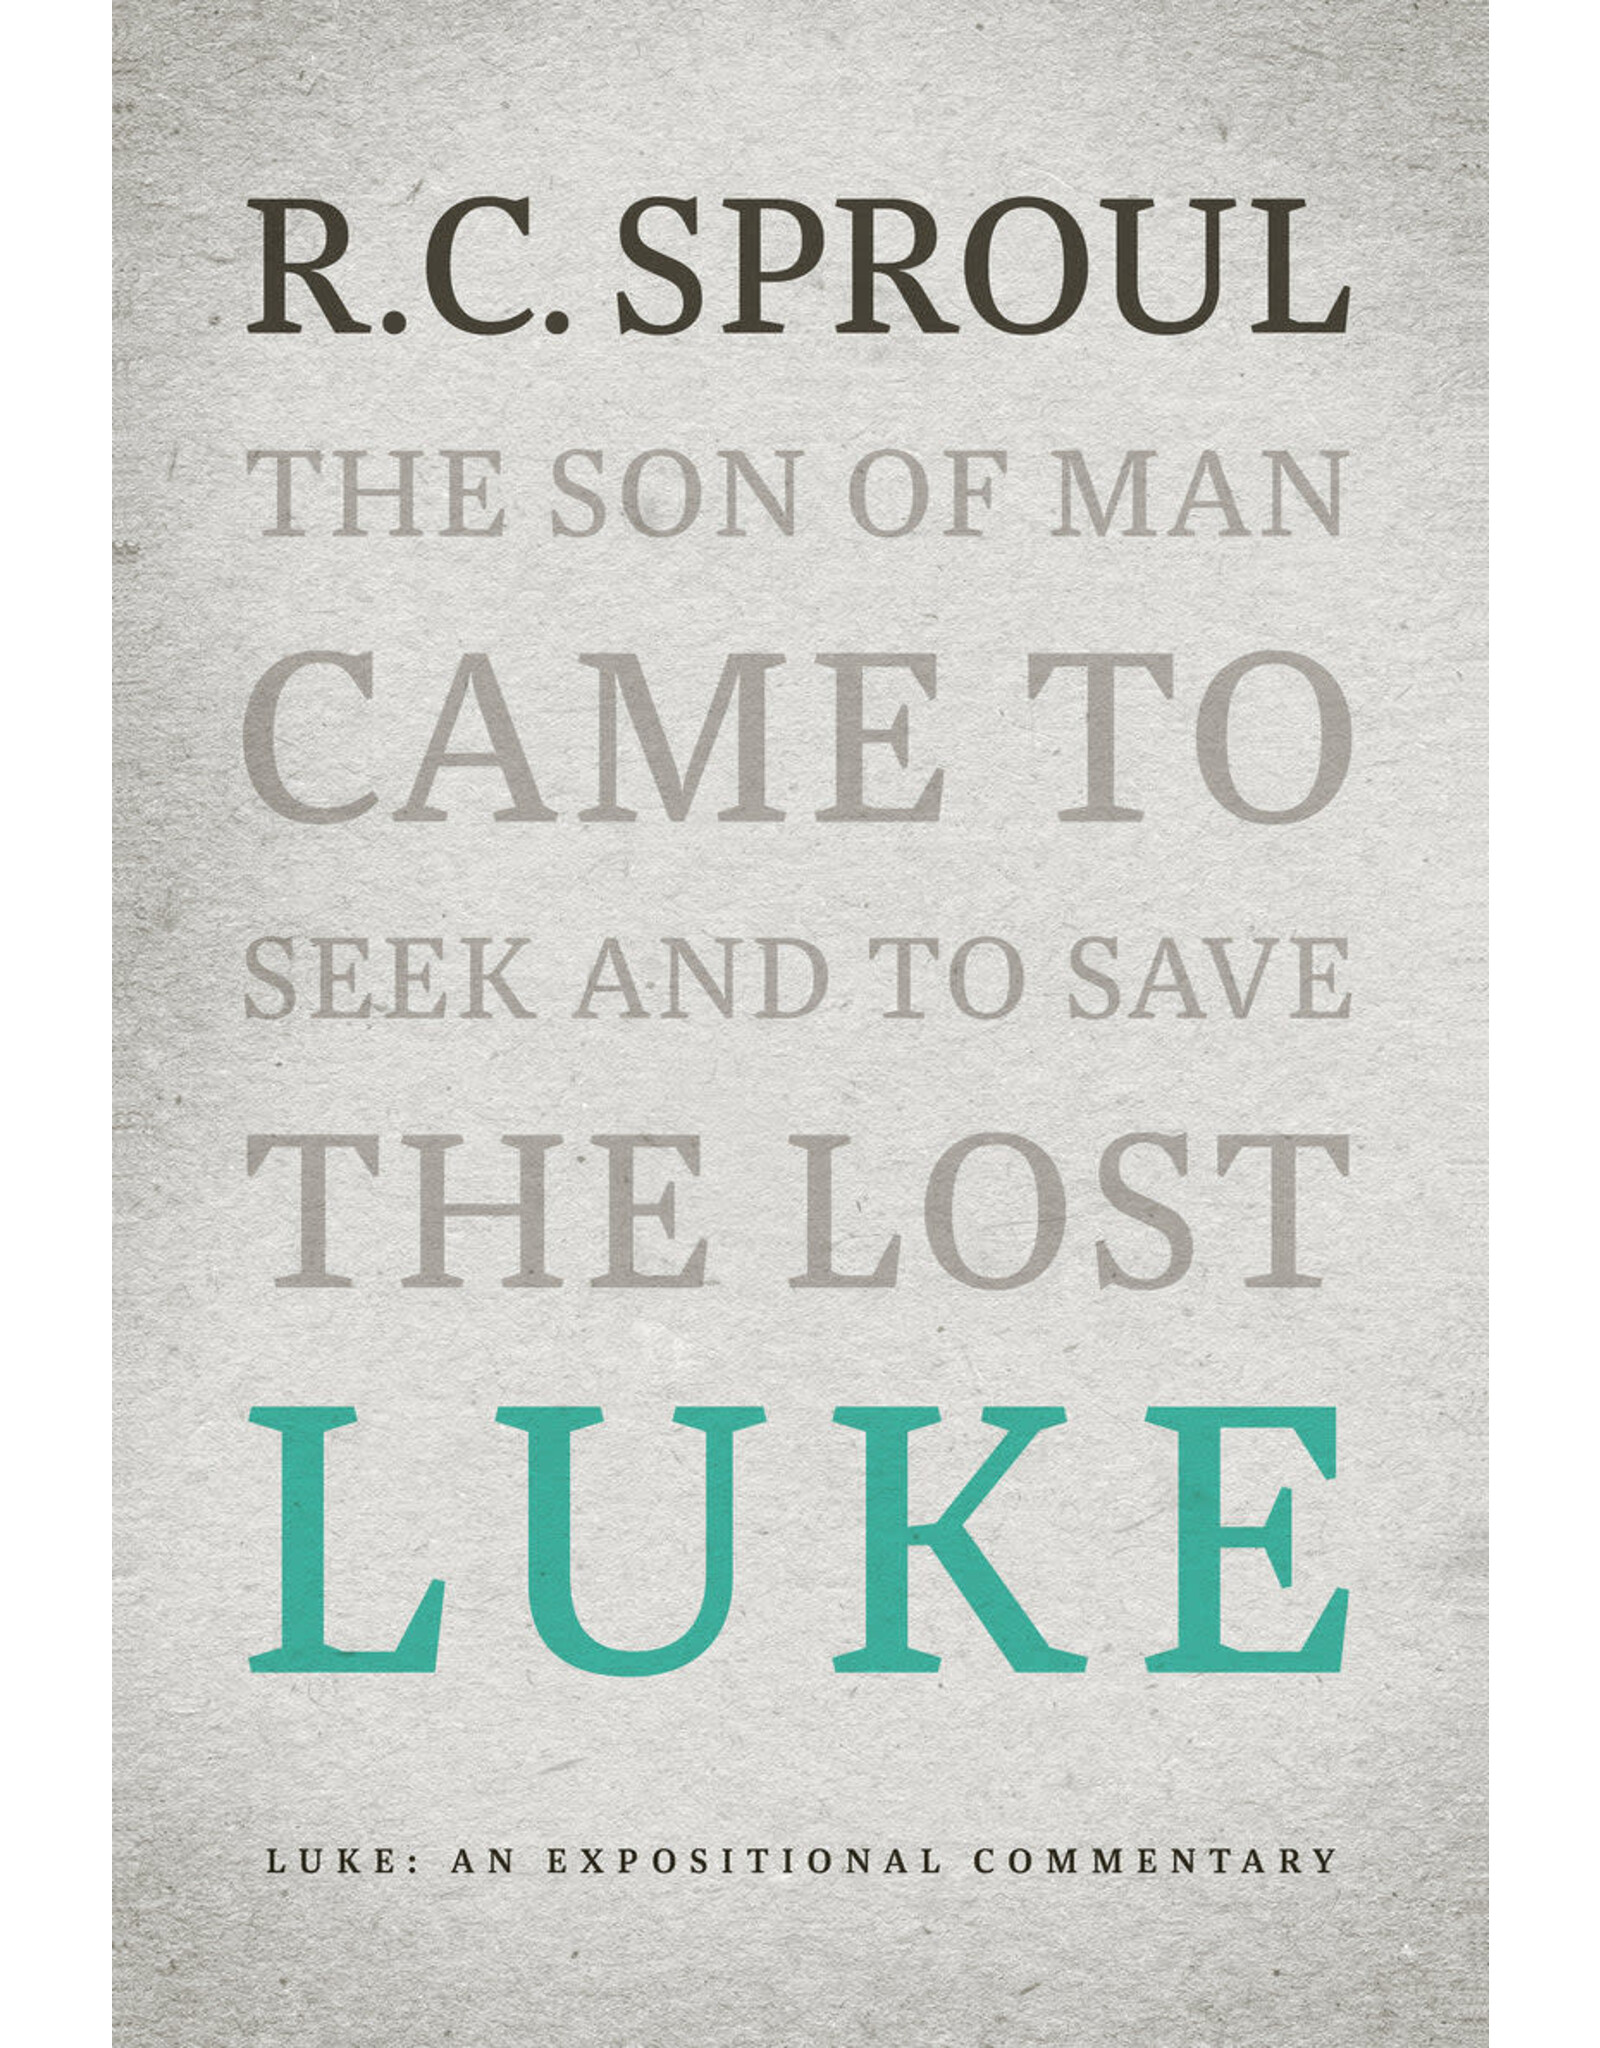 R C Sproul Luke: An Expositional Commentary